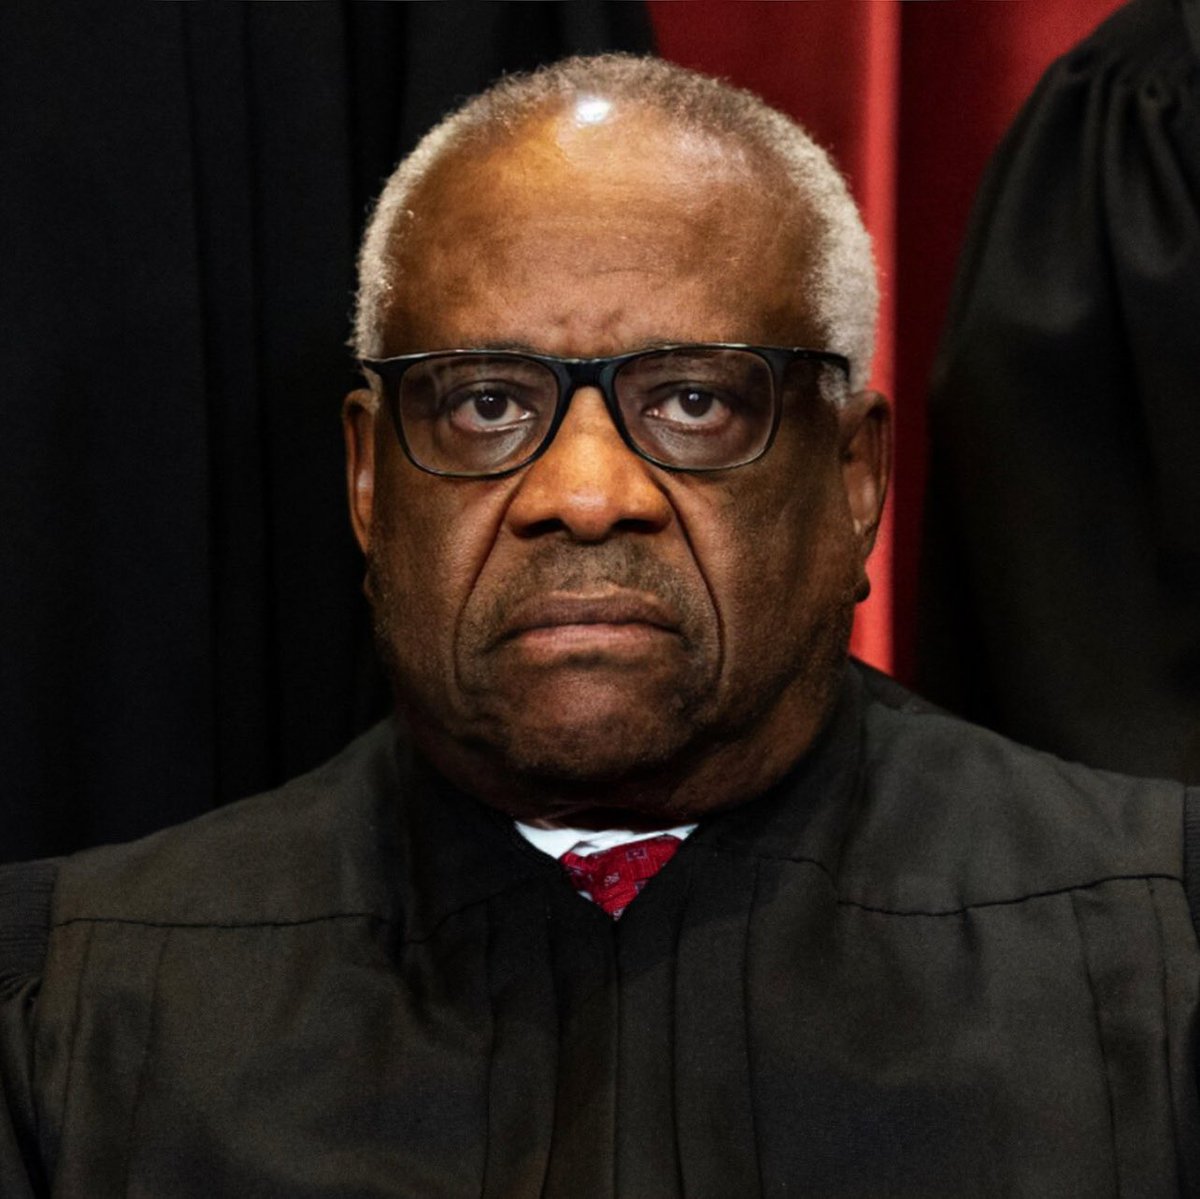 Clarence Thomas. You just voted to gut affirmative action and student loan forgiveness. Let’s take a look how you got into Yale, shall we? During your 58-page concurring opinion, you wrote that the foundational policies of affirmative action 'fly in the face of our…